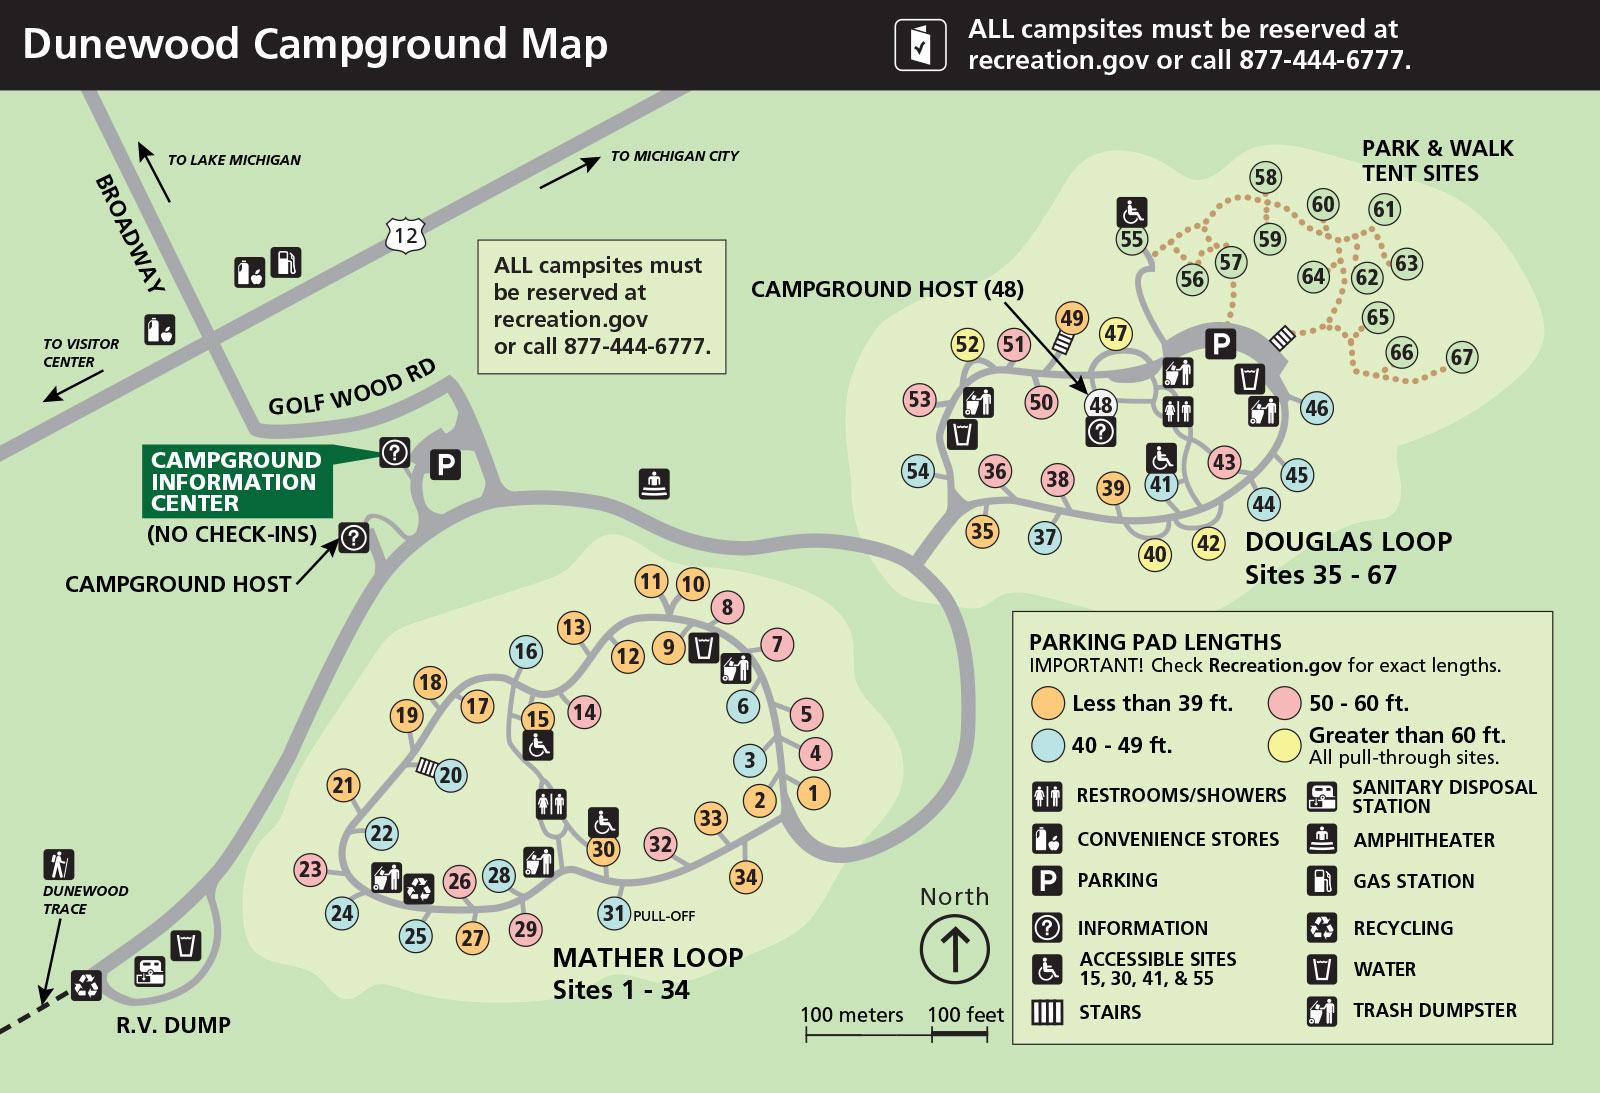 Dunewood Campground Site Map